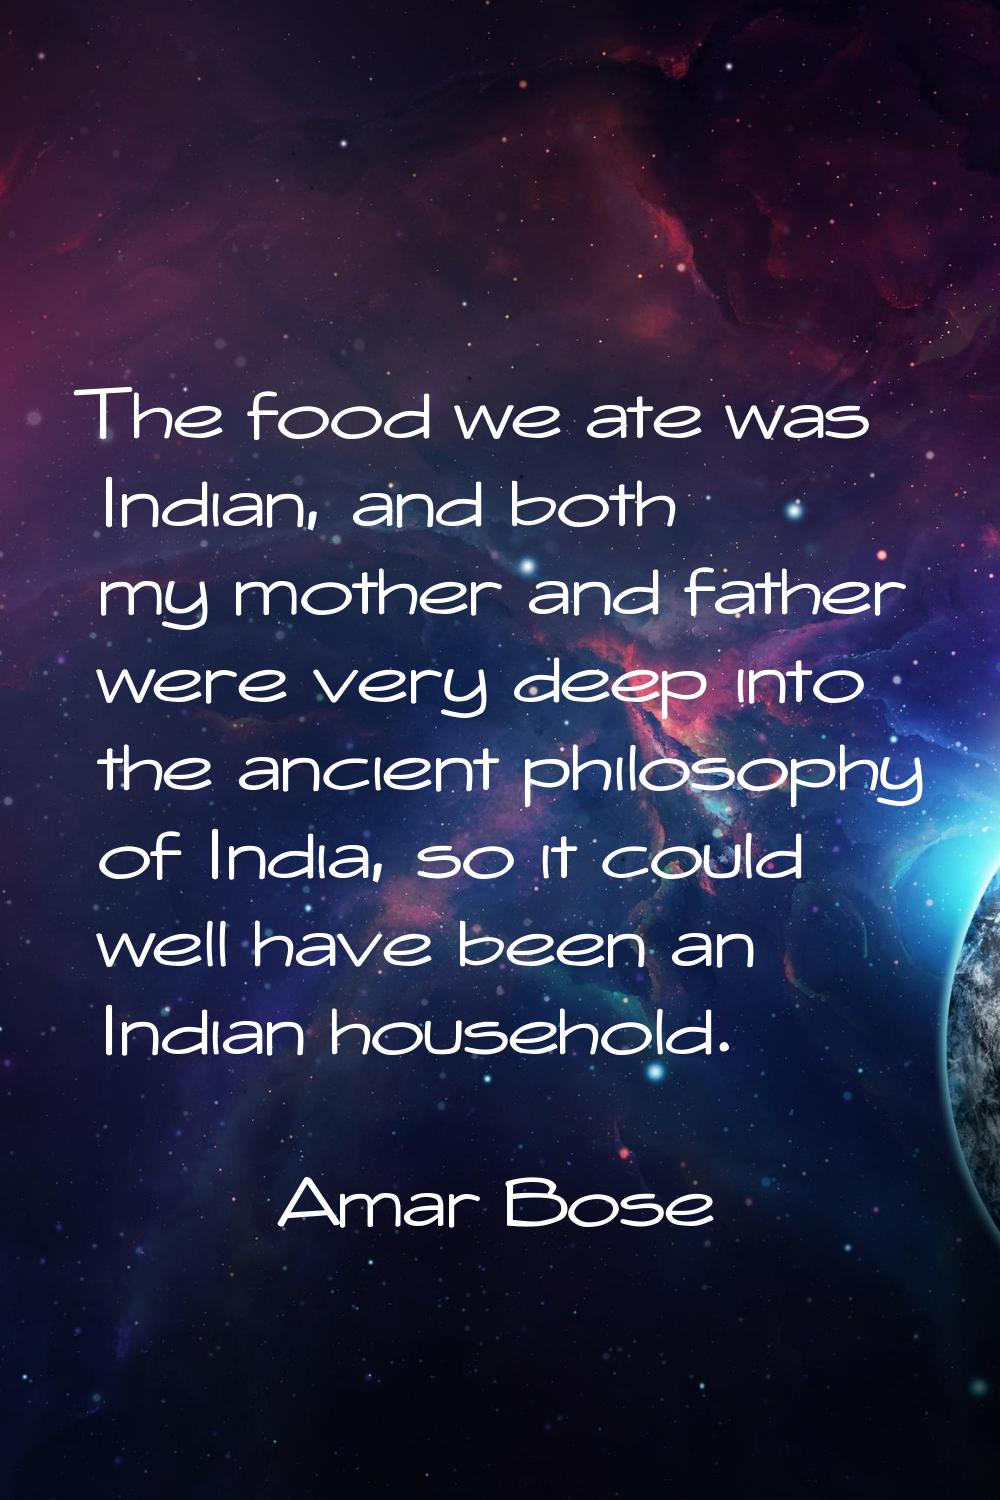 The food we ate was Indian, and both my mother and father were very deep into the ancient philosoph